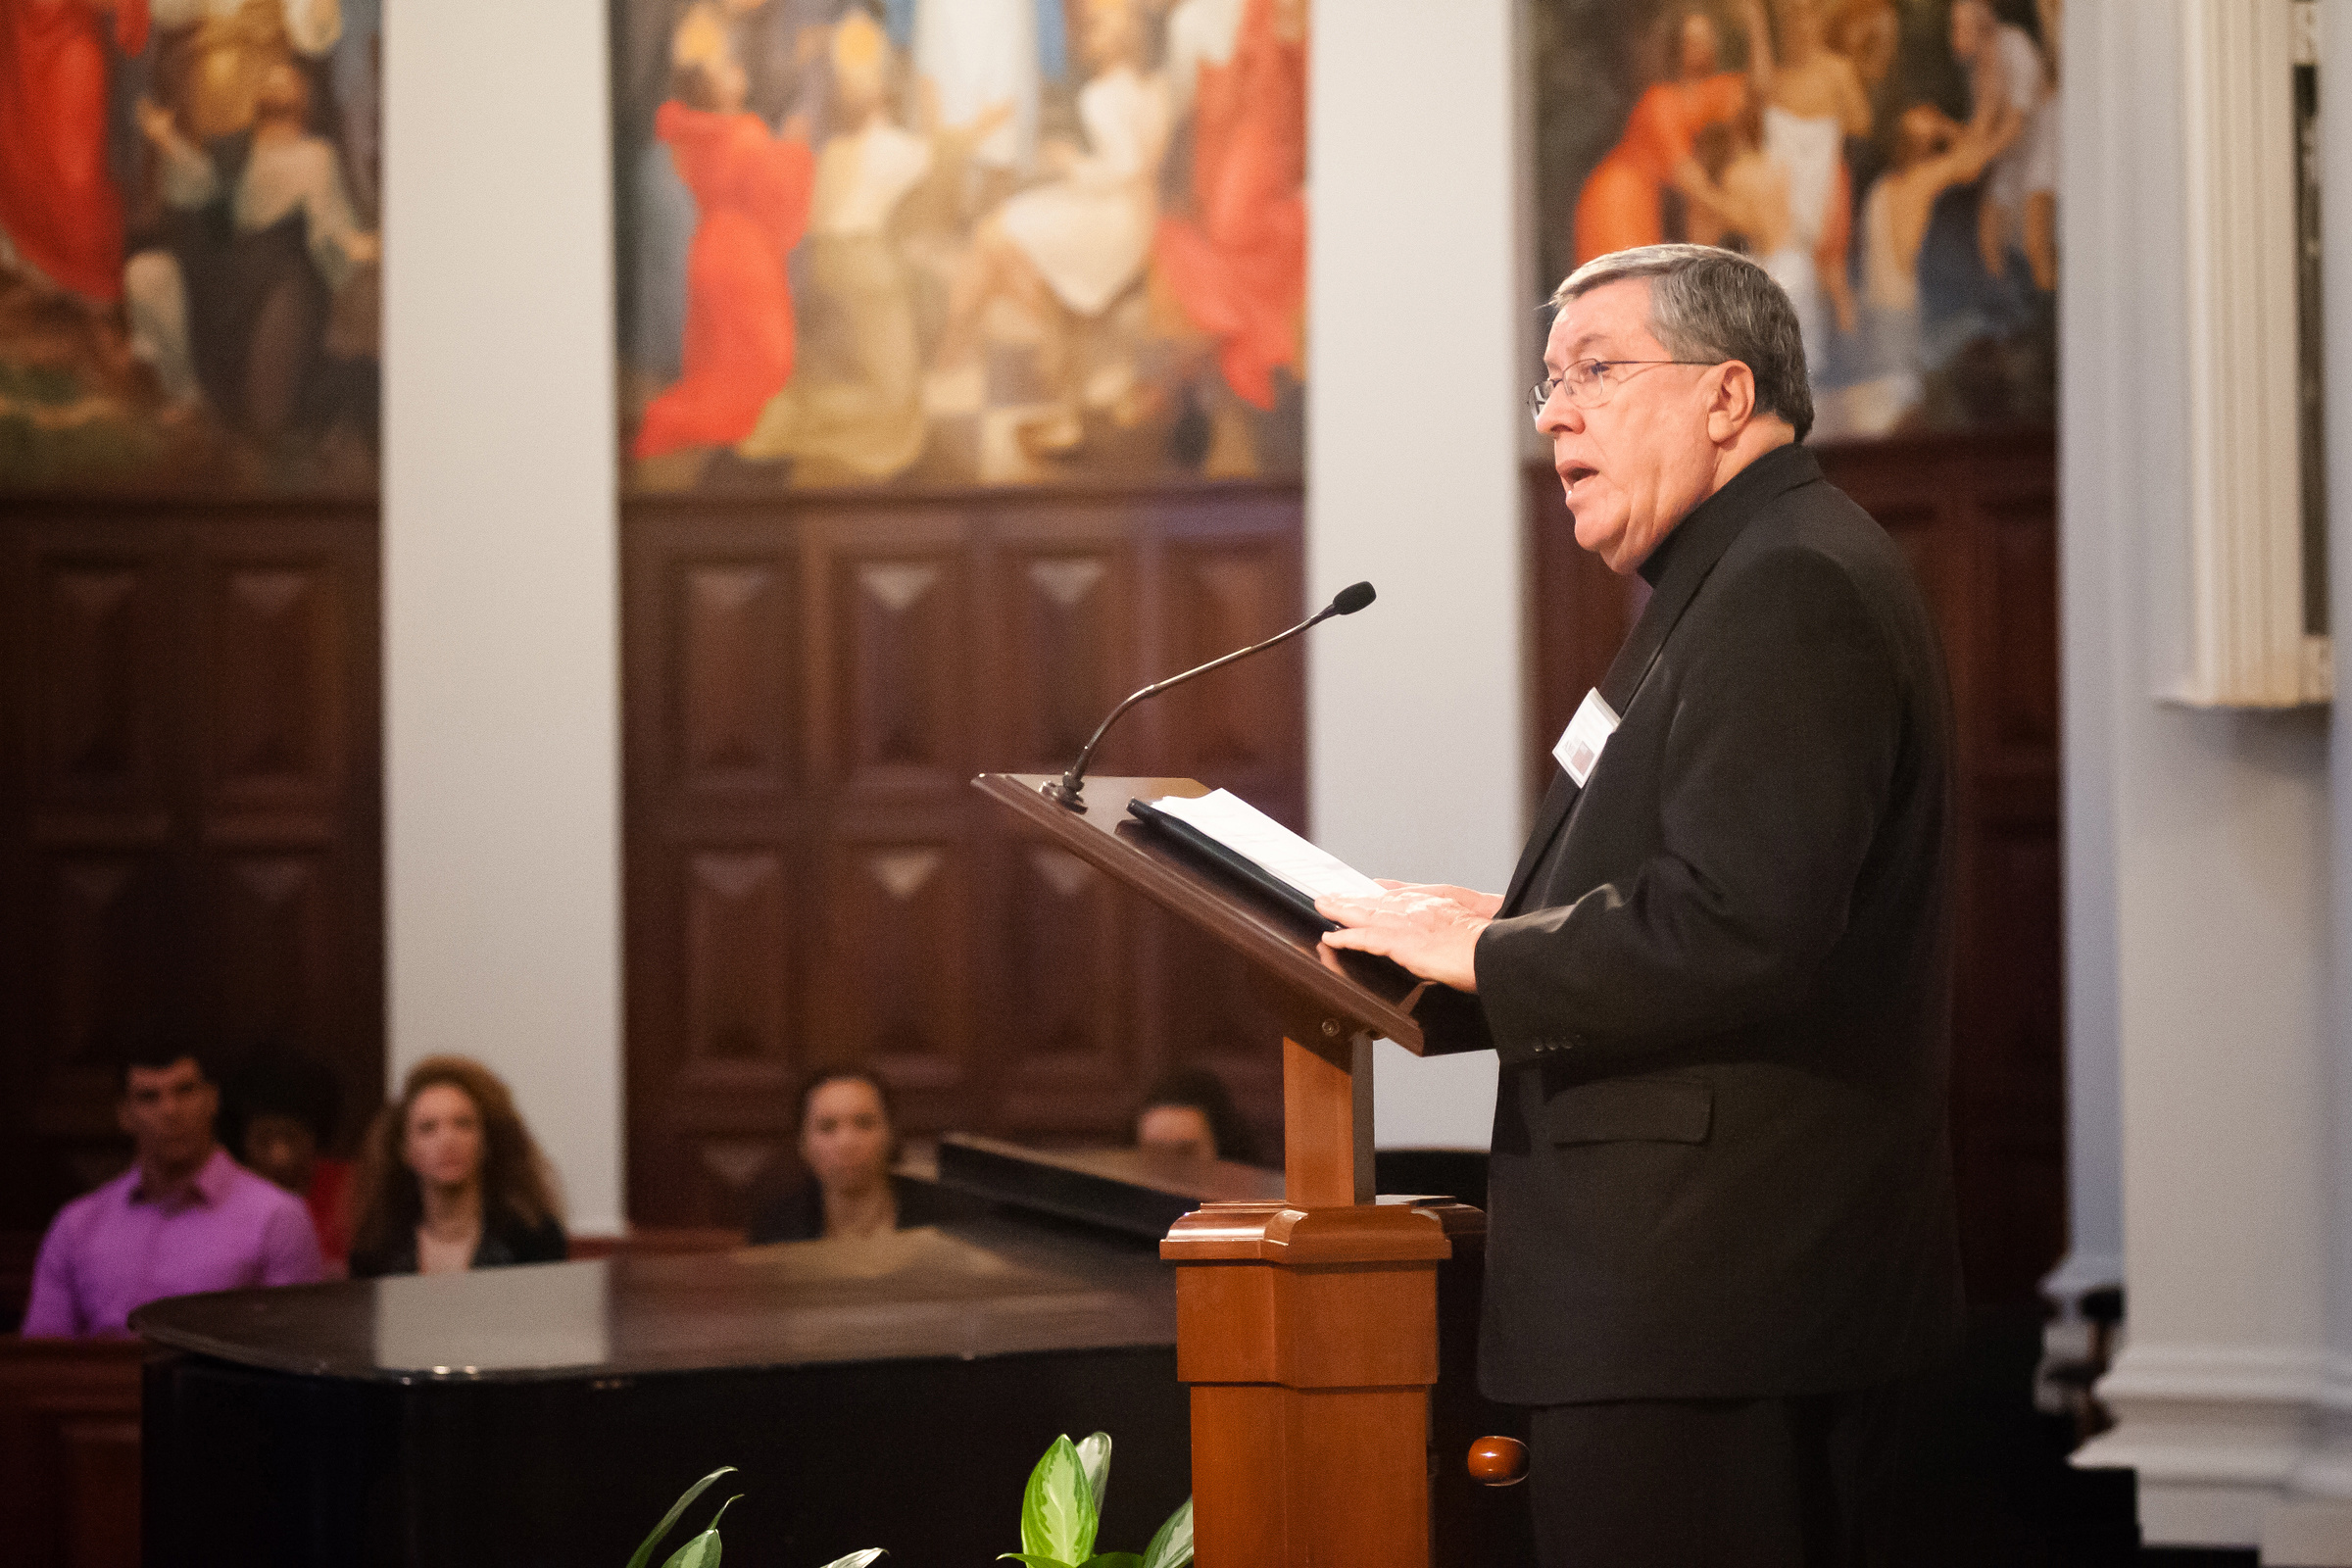 Bishop Robert Baker of Birmingham, Ala., speaks March 3 during a conference on "Black & White in America: How Deep the Divide?" conference at Samford University in Birmingham. (CNS/One Voice/Mary D. Dillard) 